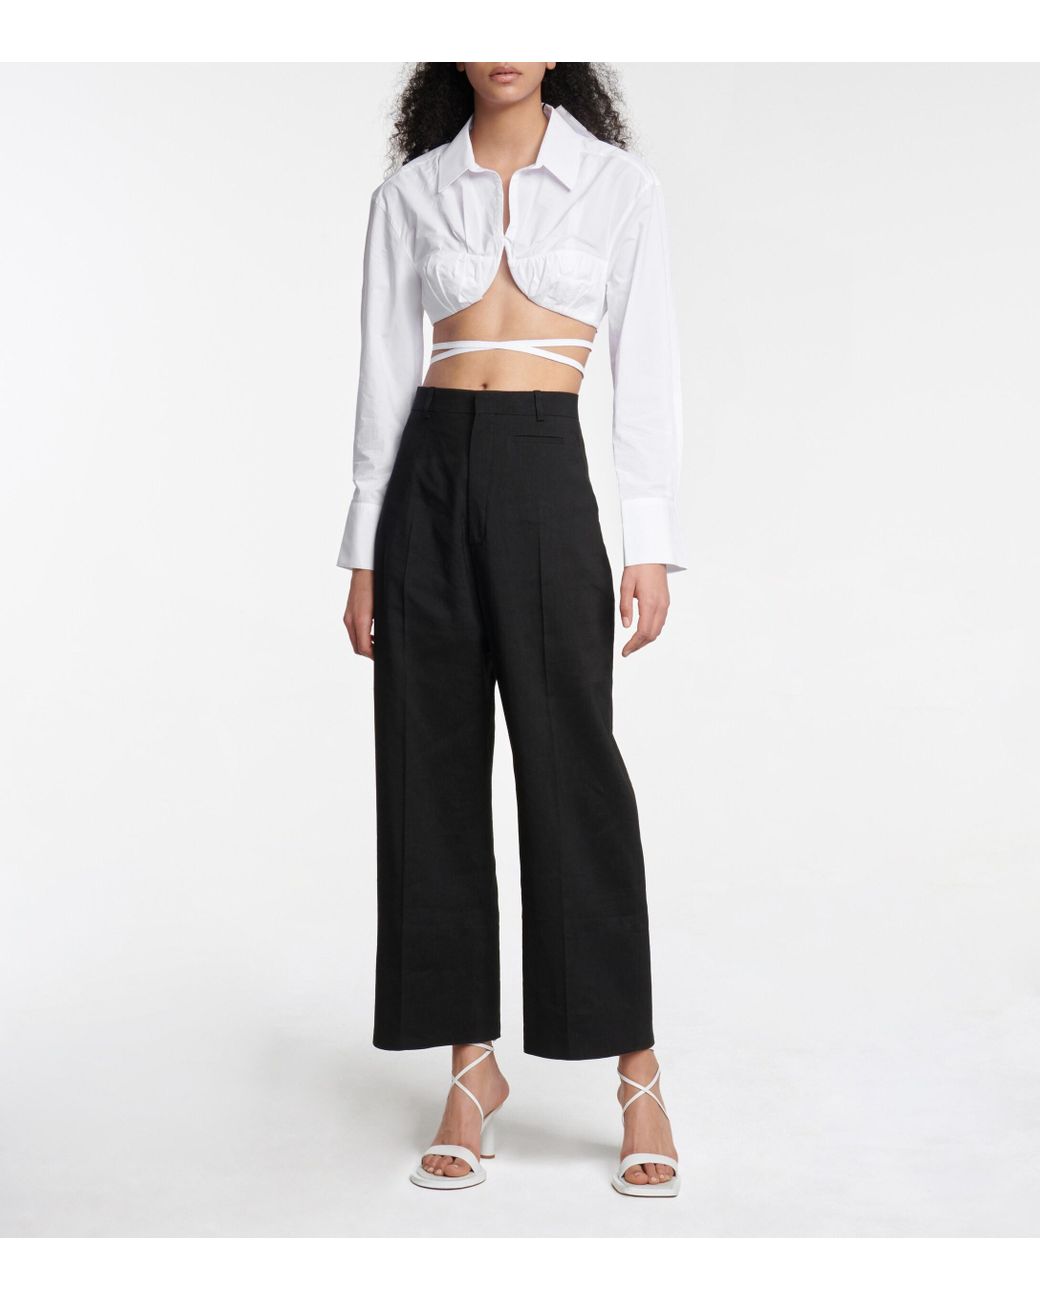 Jacquemus La Chemise Baci Cropped Cotton Shirt in White | Lyst